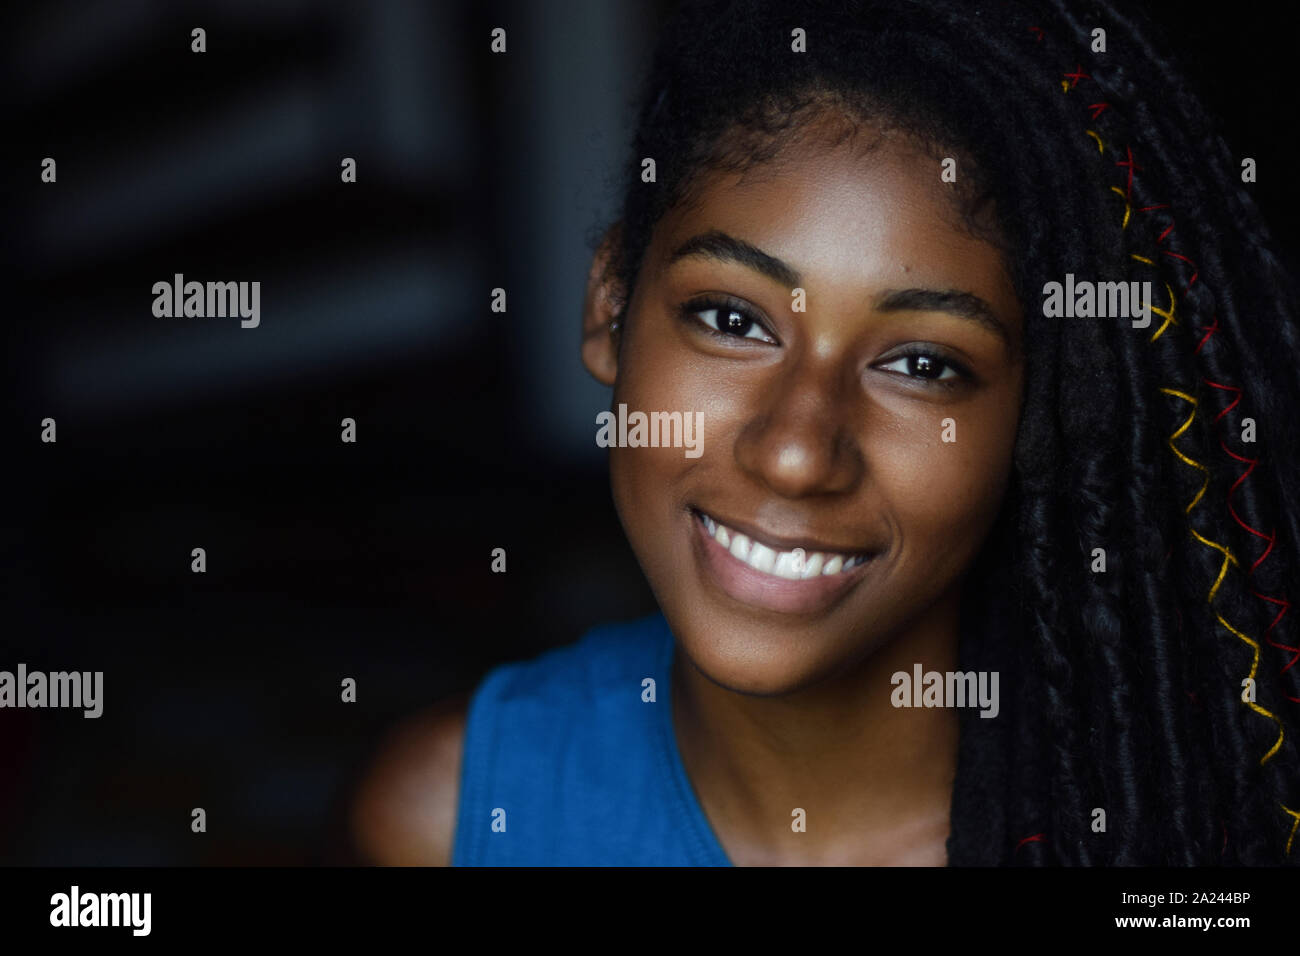 Interior close up portrait of young black woman with dreadlocks, Cali, Colombia Stock Photo